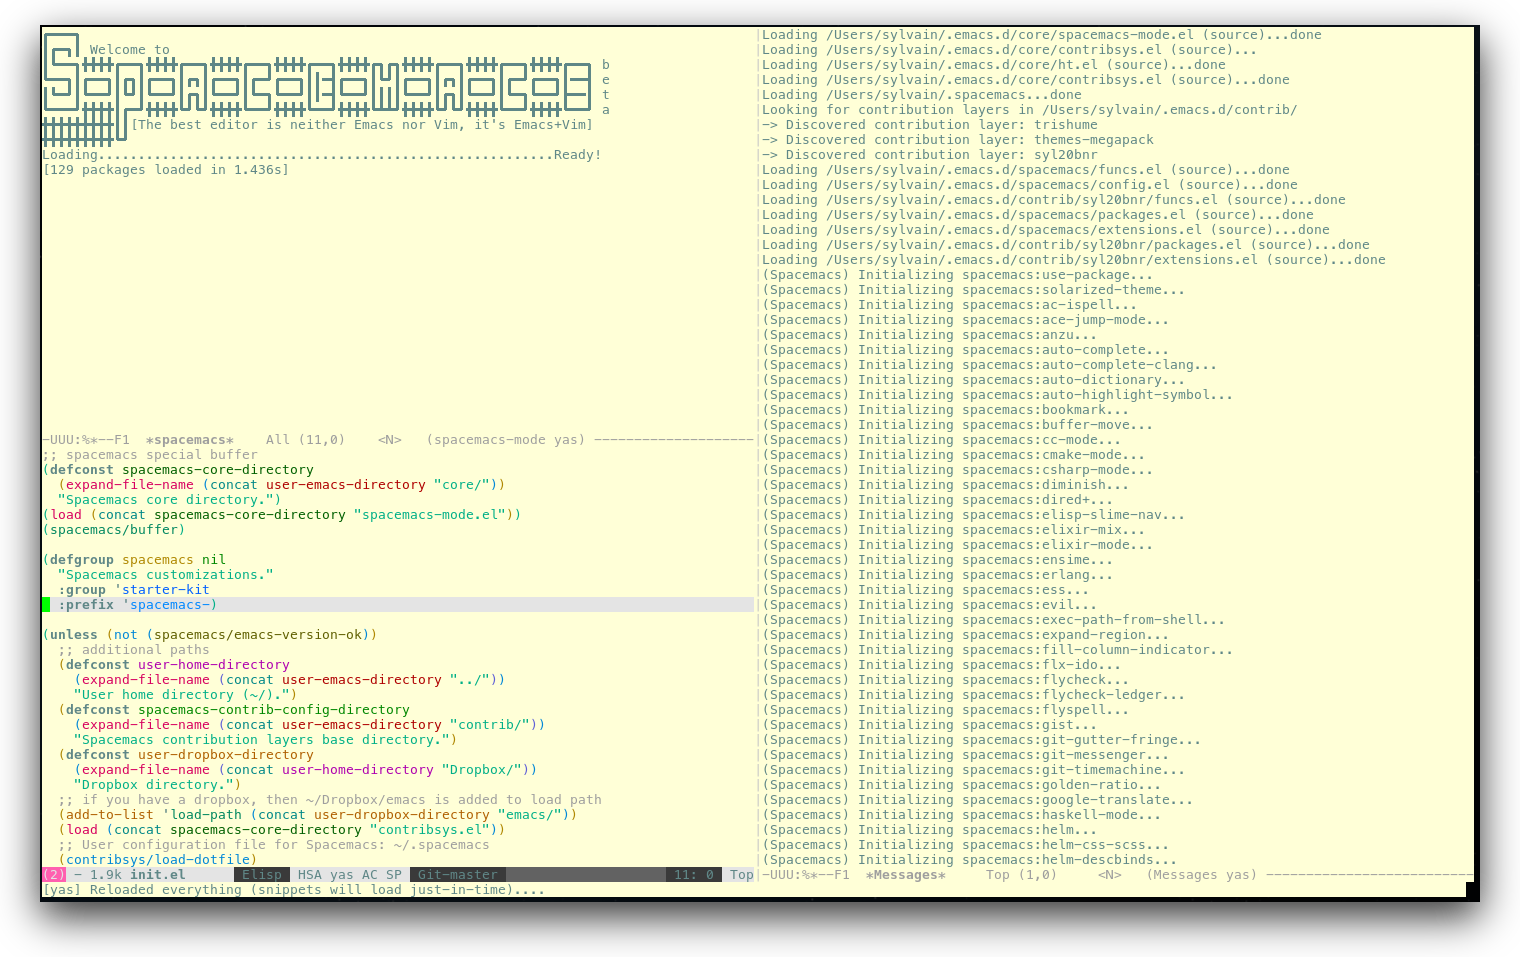 /TakeV/spacemacs/media/commit/2e8f62cc2204df39a86f0816a246dfce12aebac7/doc/img/spacemacs-urxvt.png